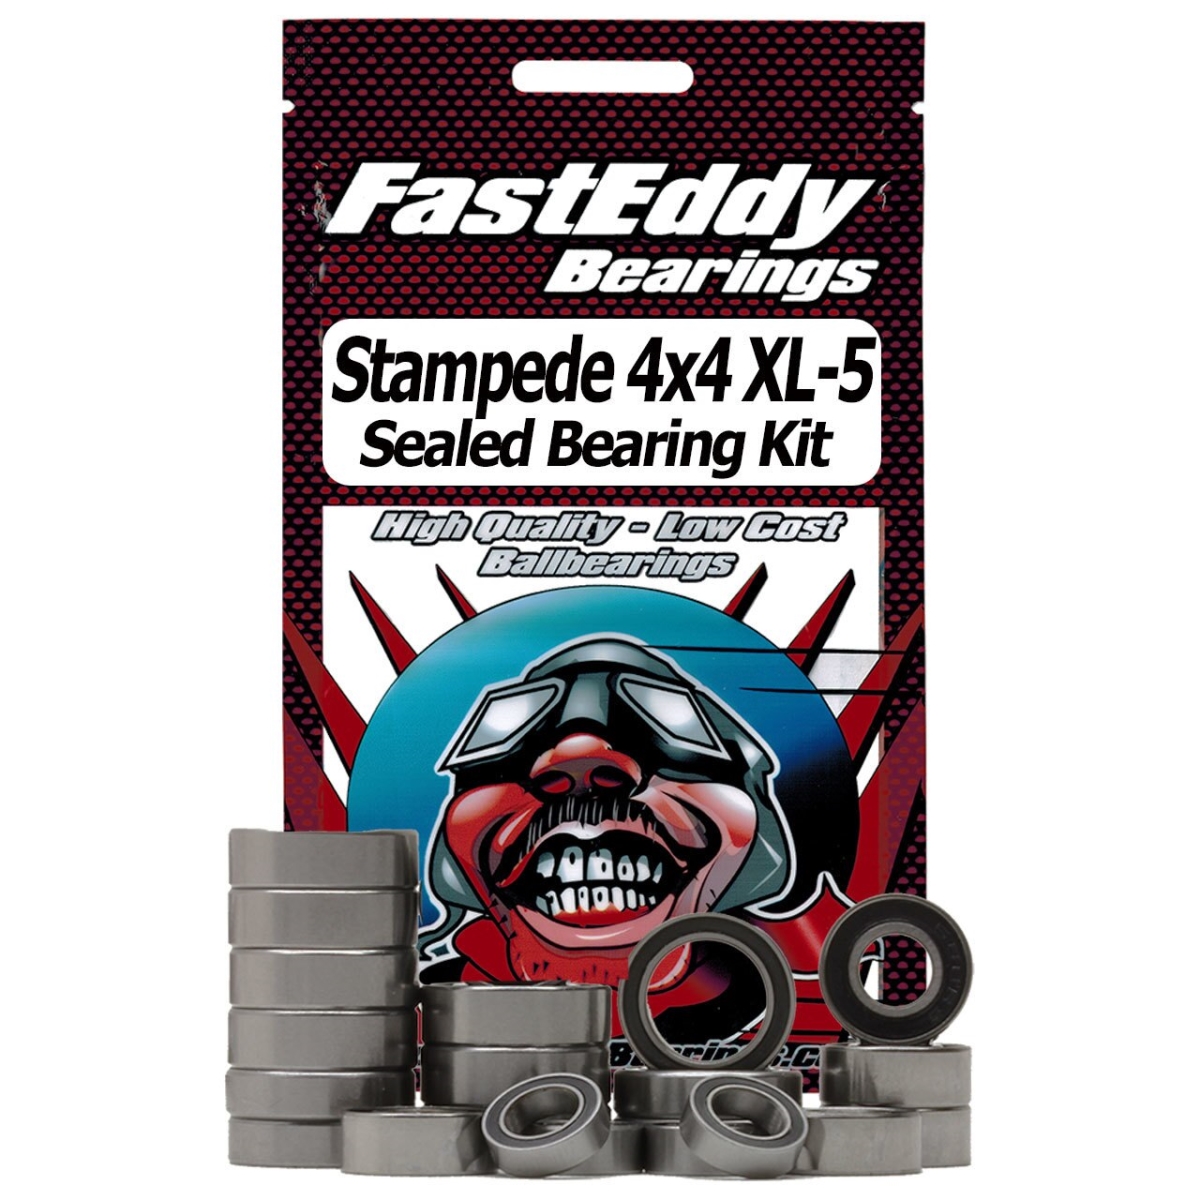 TFE2188 Traxxas Stampede 4x4 XL-5 Sealed Bearing Kit -  FastEddy